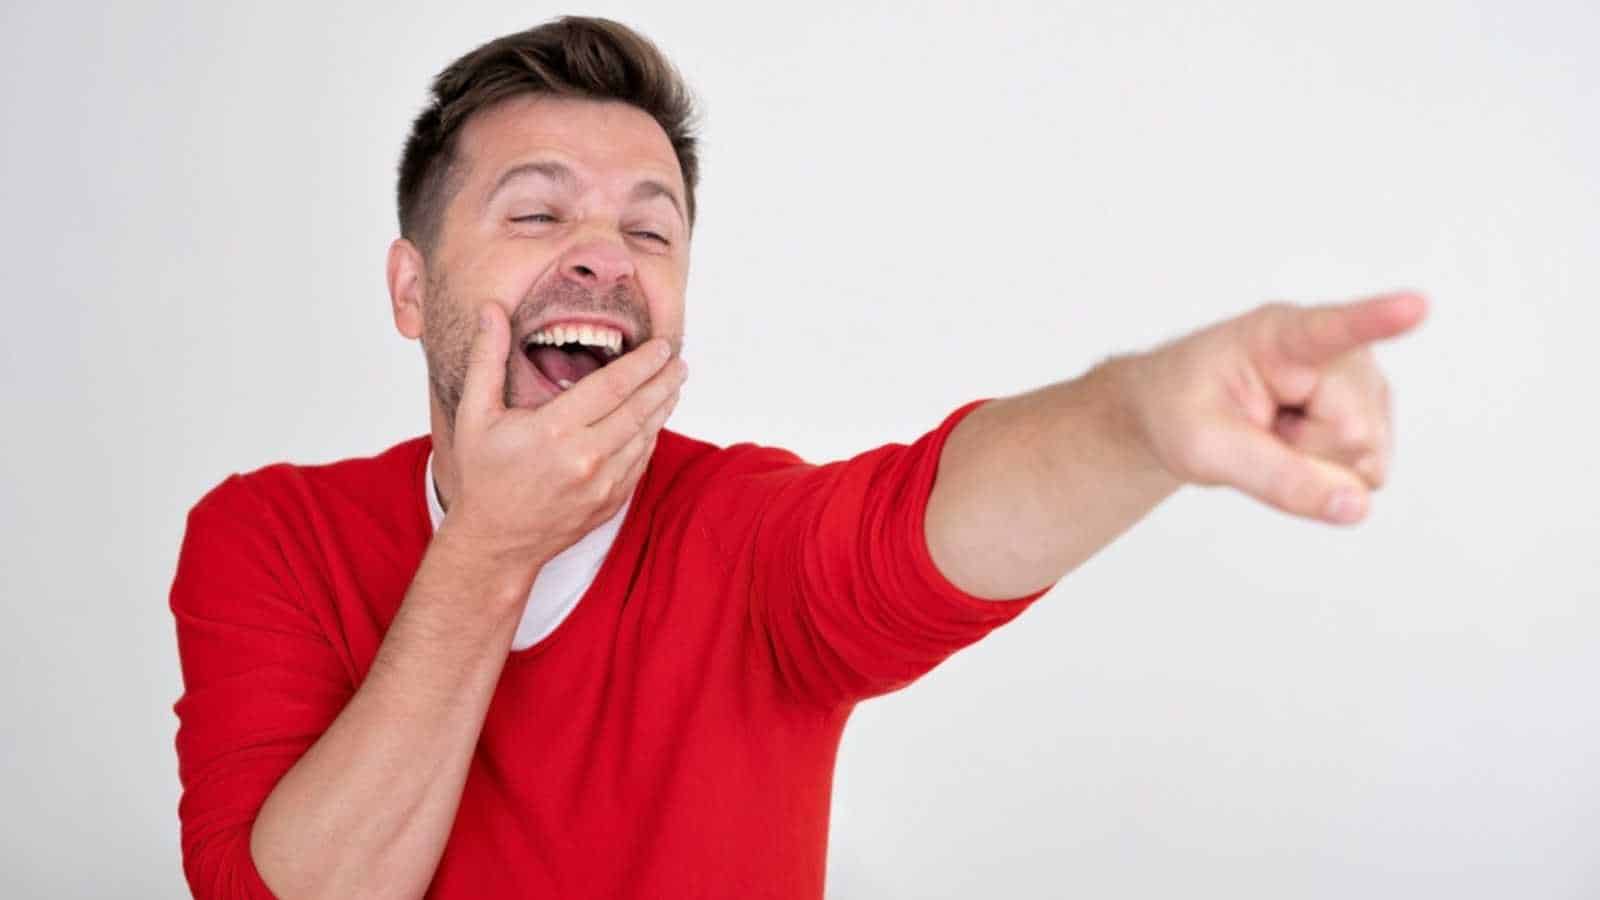 Man pointing and laughing